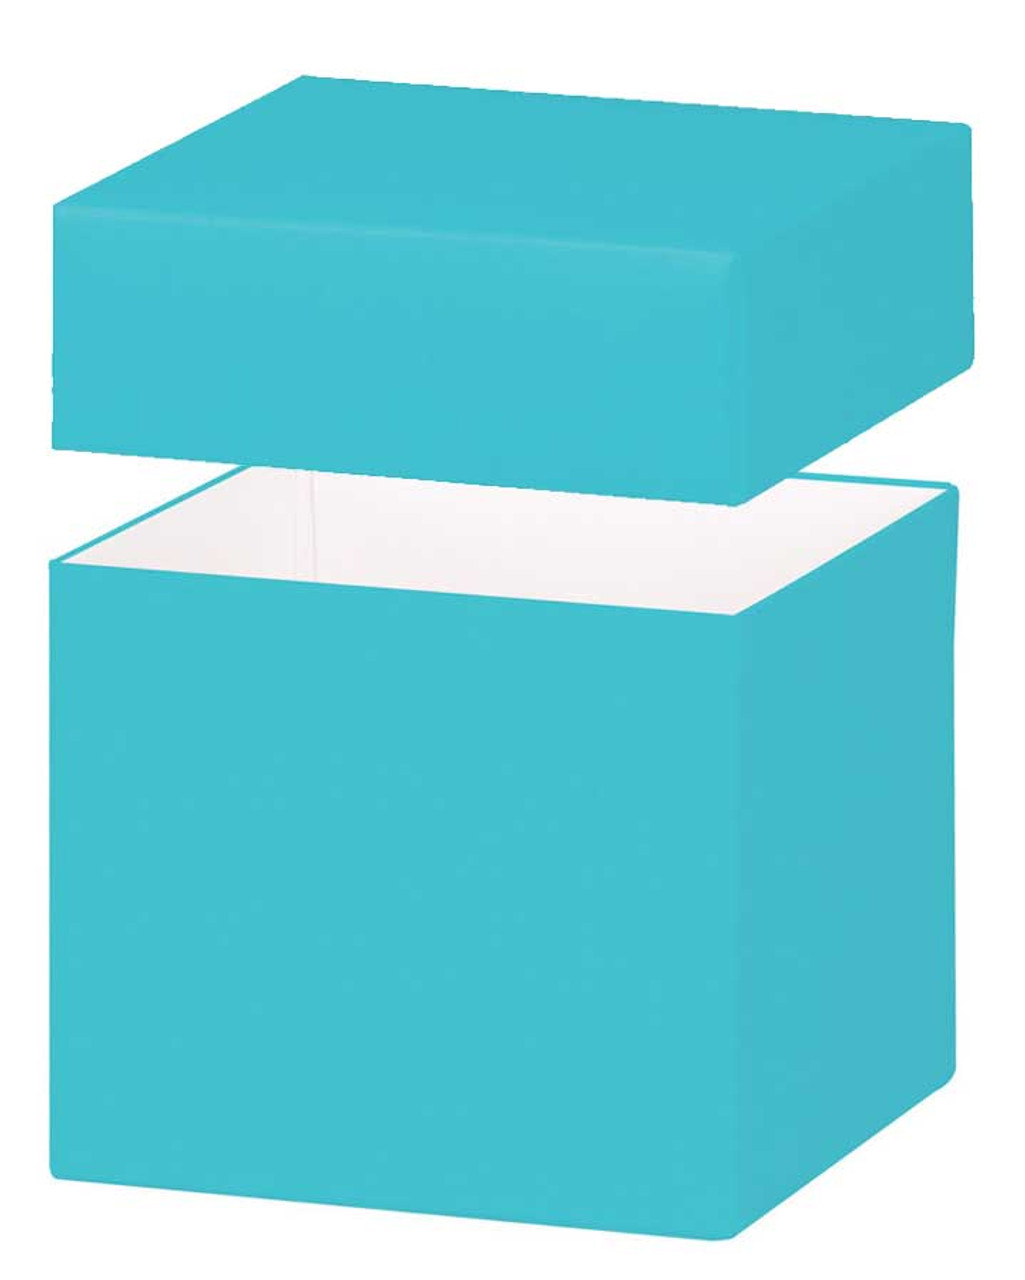 8"x8"x5" Deluxe Gourmet Gift Box-Robins Egg Blue